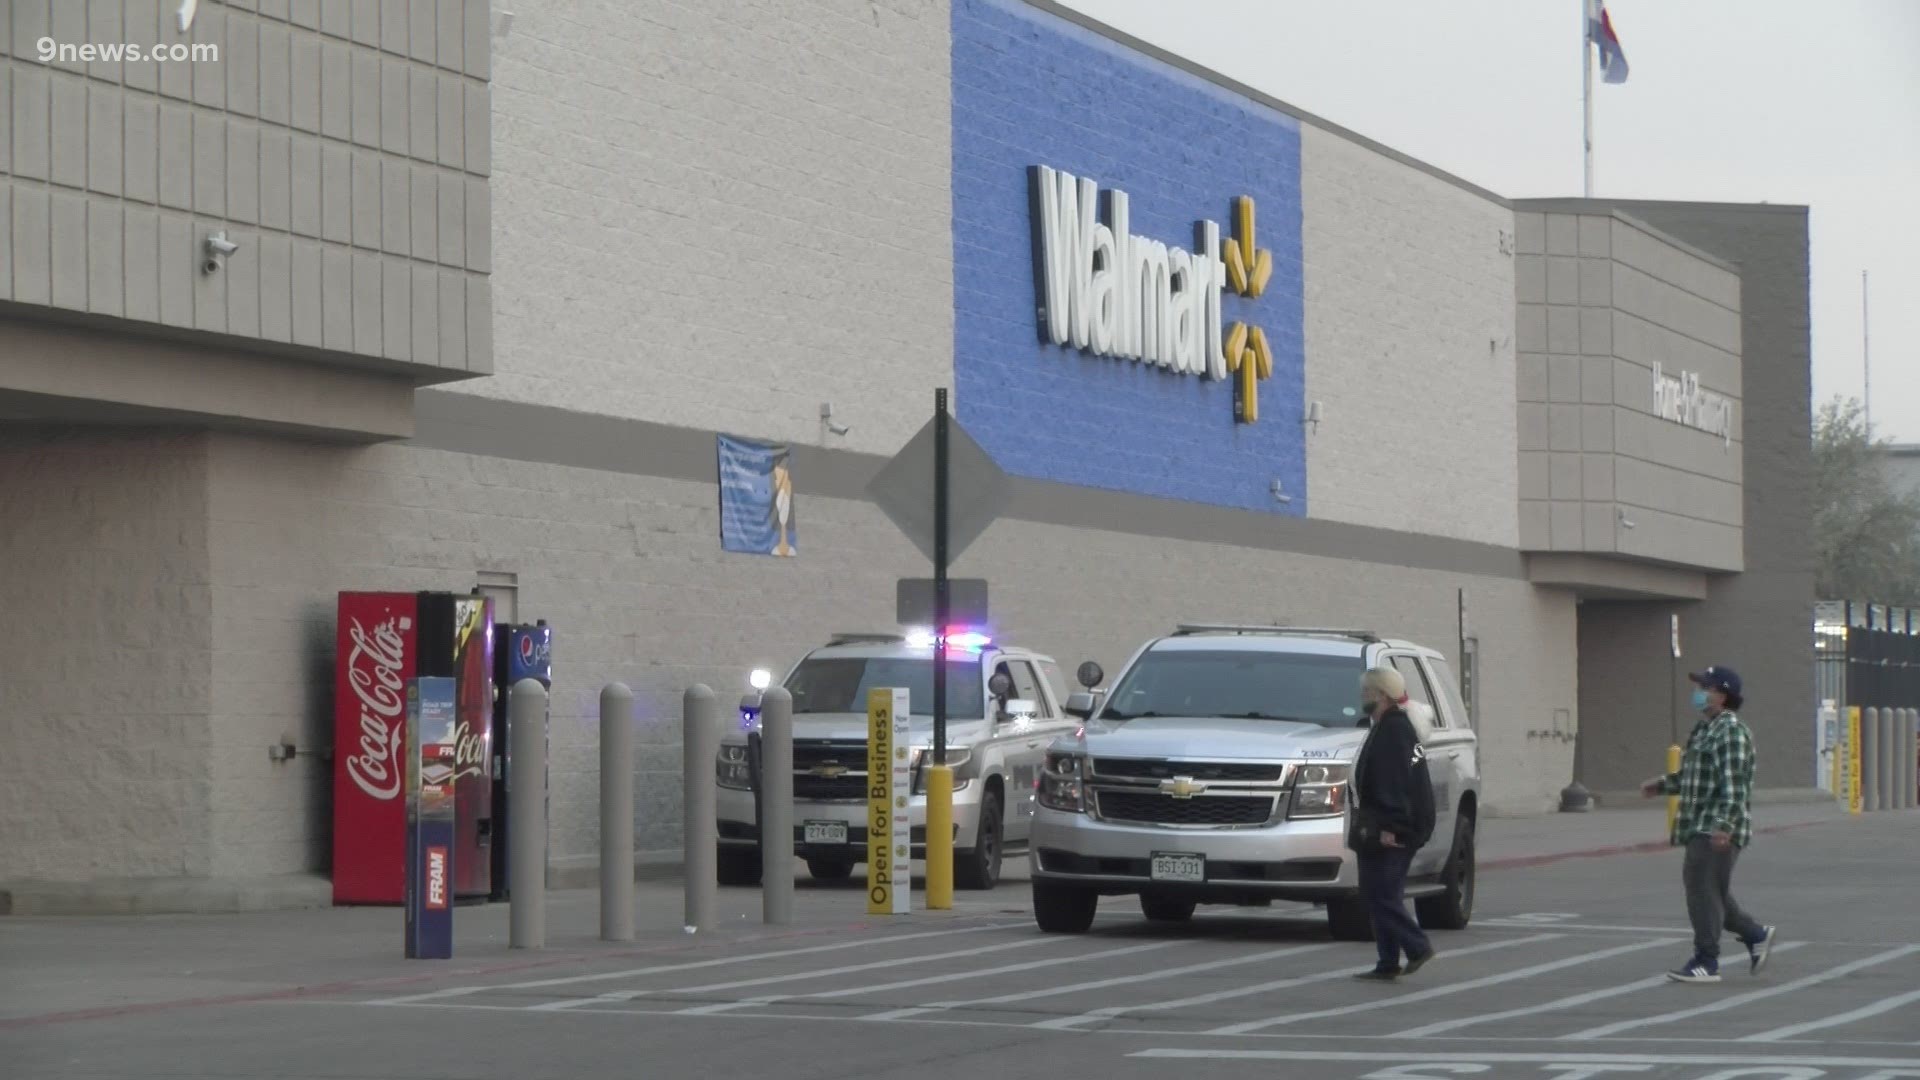 Two men are accused of firing numerous shots at each other in the parking lot of a Walmart store in Greeley.